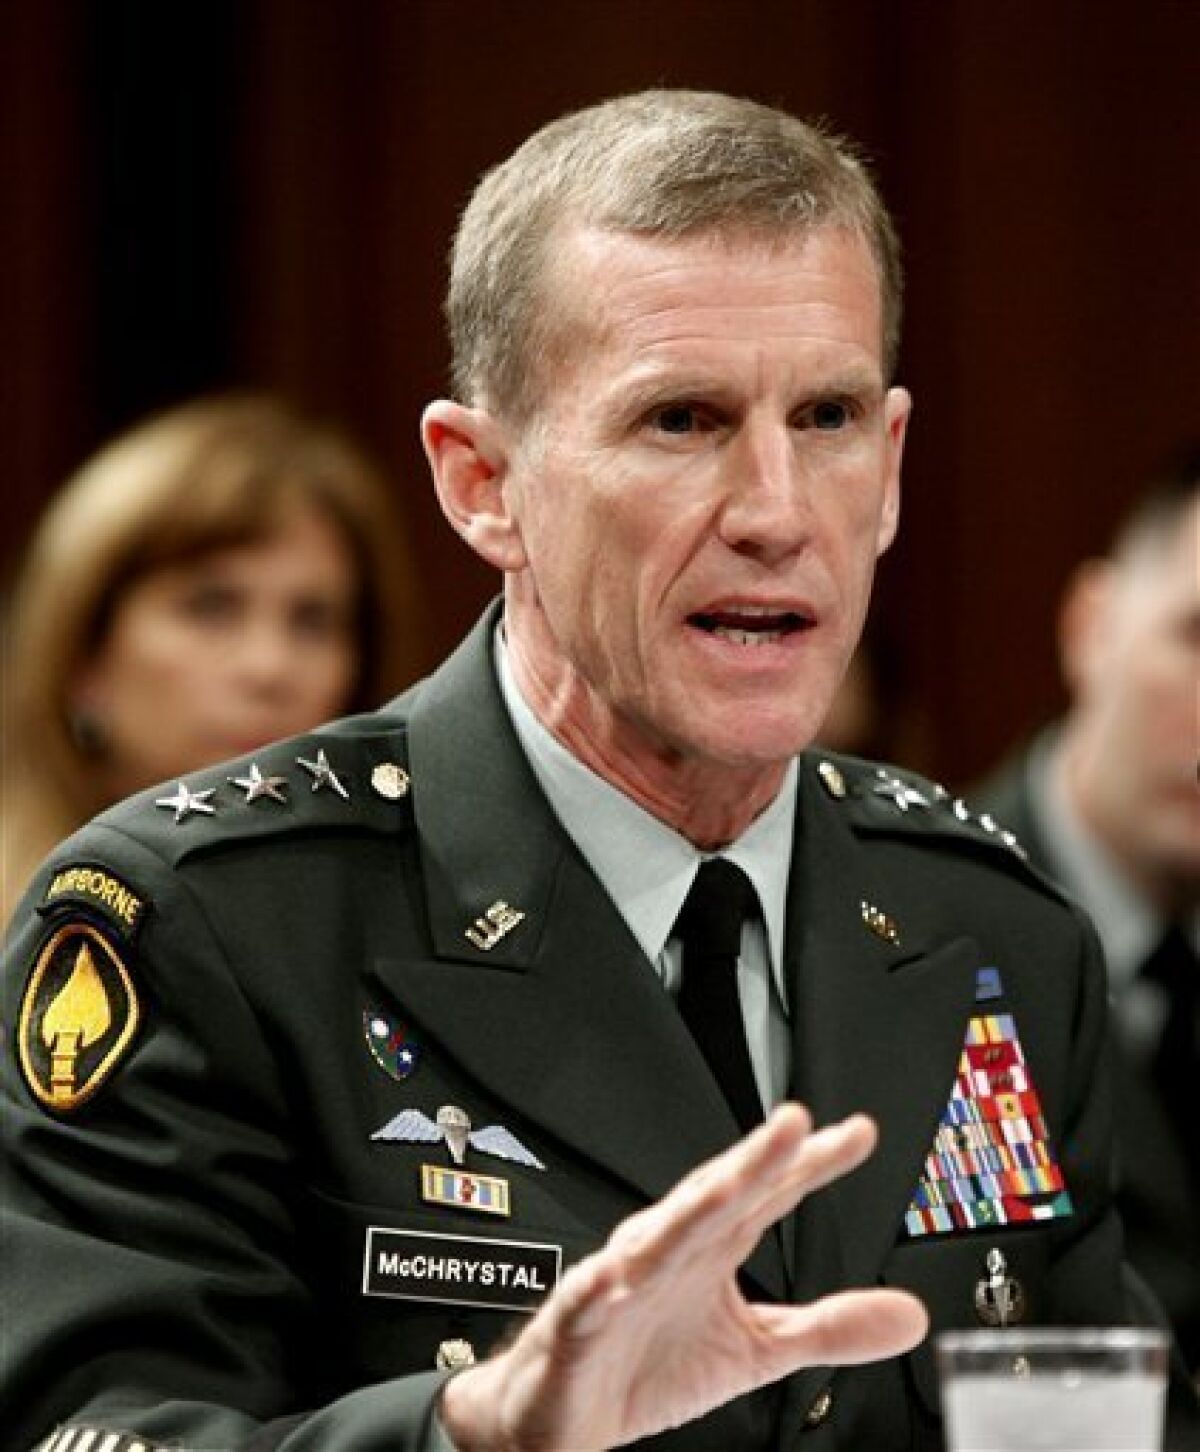 FILE - In this June 2, 2009 file photo, Lt. Gen. Stanley A. McChrystal, then President Barack Obama's nominee to be commander of U.S. forces in Afghanistan, testifies on Capitol Hill in Washington before the Senate Armed Services Committee. McChrystal was put in charge of a drifting war in Afghanistan in part because he wasn't afraid to speak up. That quality may prove to be his downfall as President Barack Obama decides whether to fire him. (AP Photo/Manuel Balce Ceneta, File)